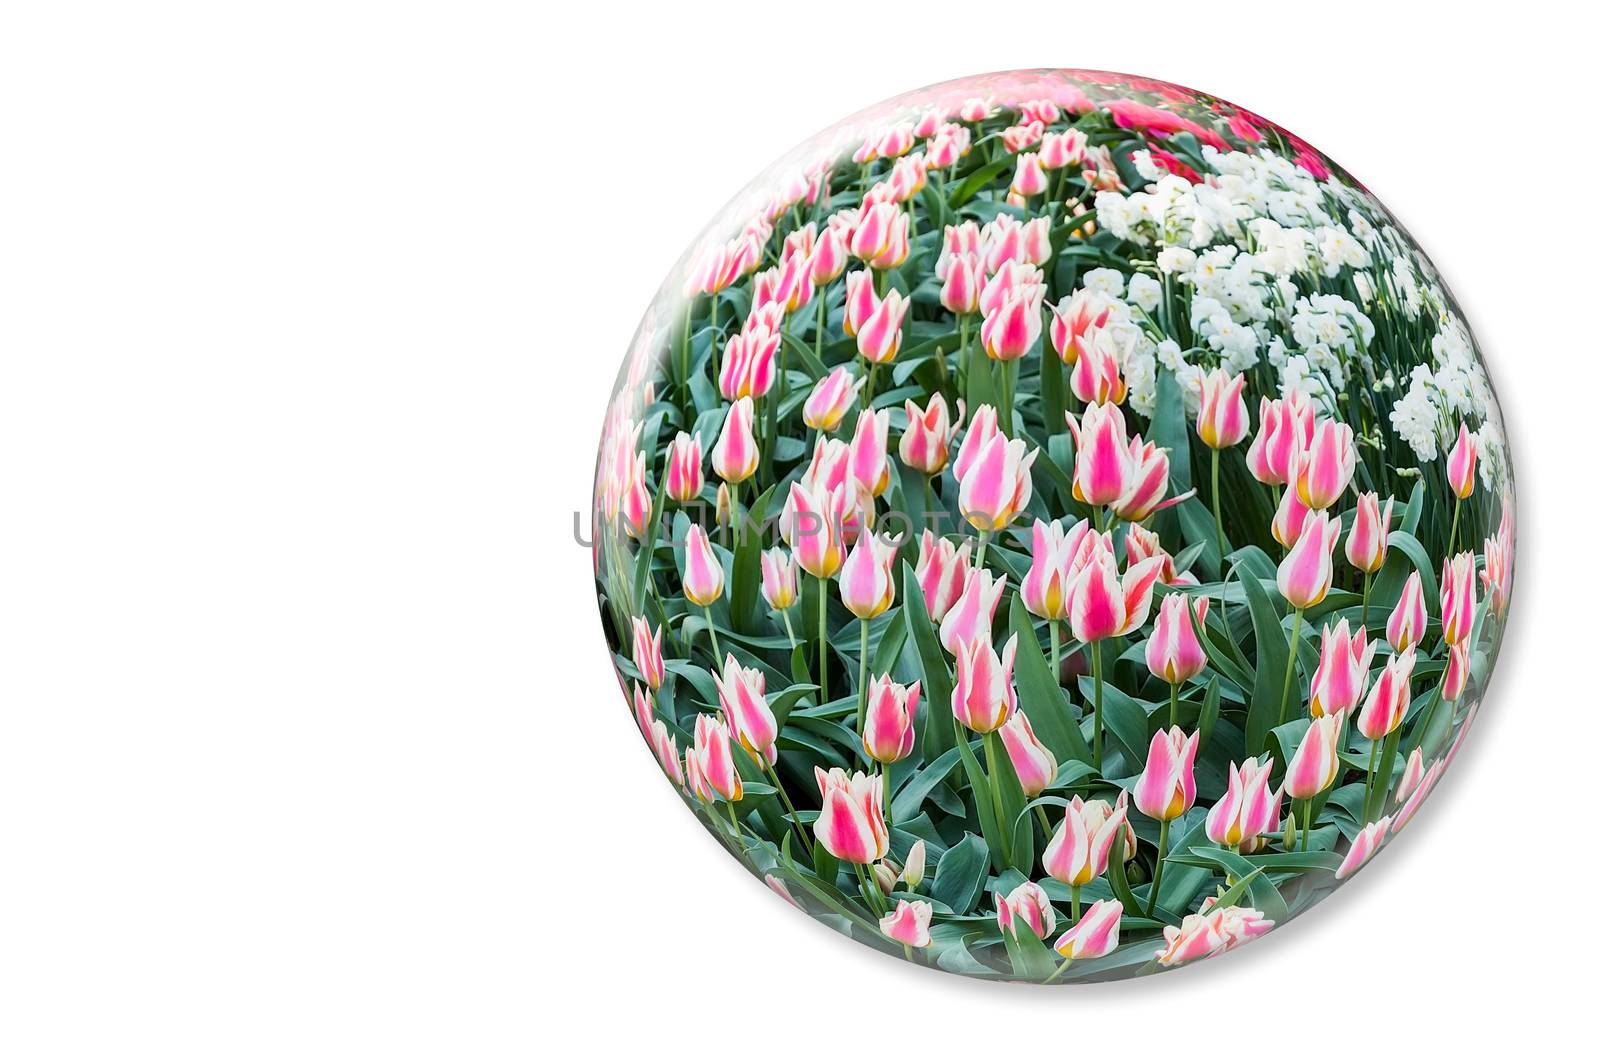 Crystal ball with red white tulips in Keukenhof Holland on white background